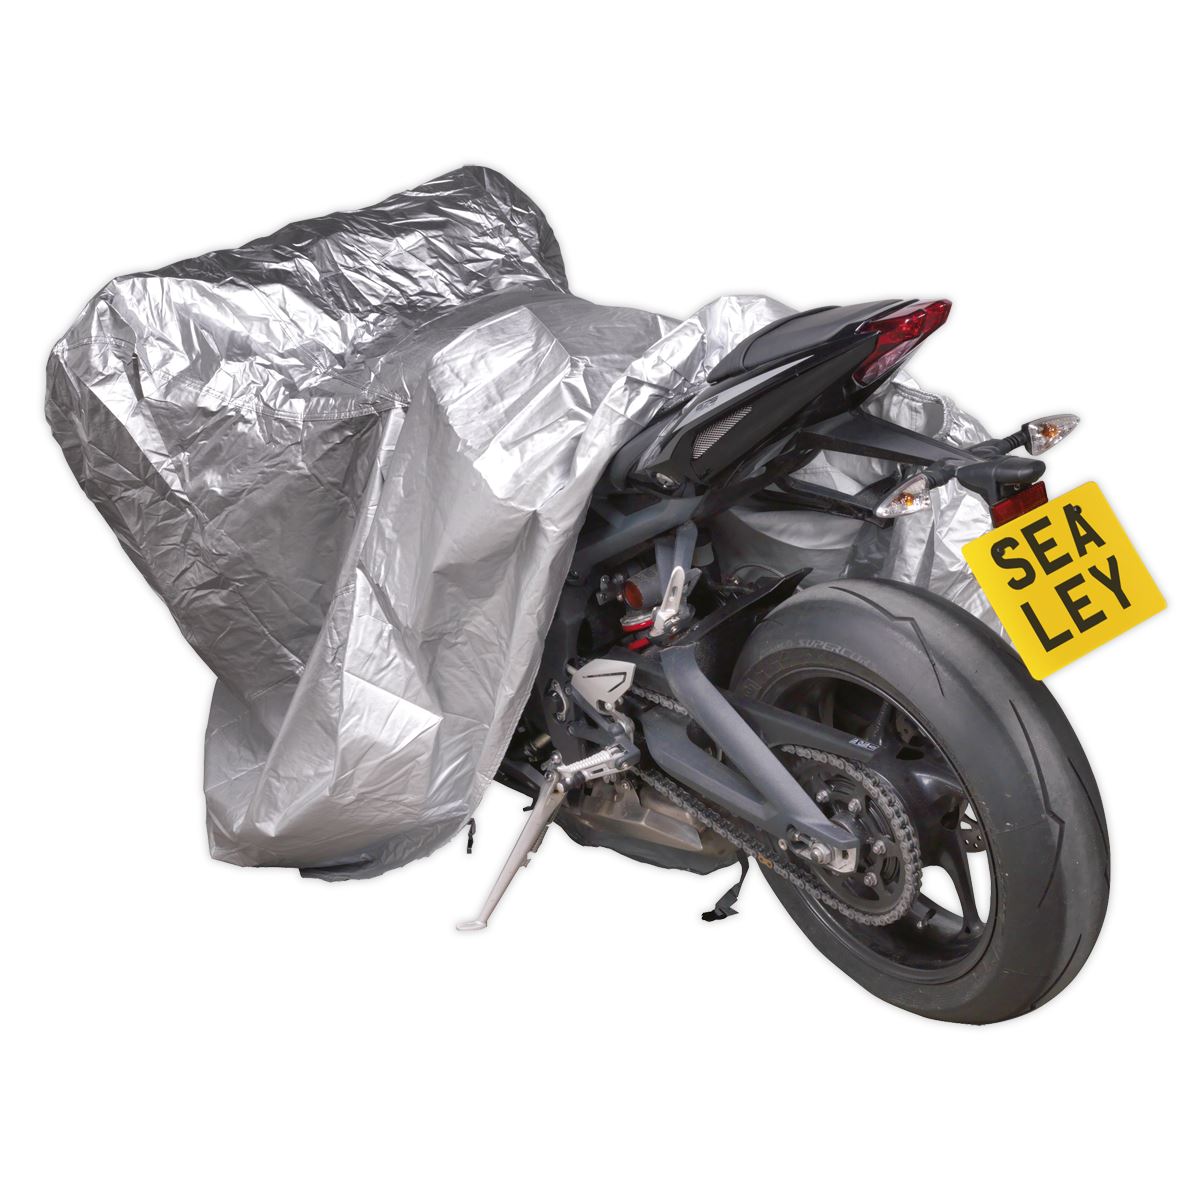 Sealey Motorcycle Cover Small 1830 x 890 x 1300mm